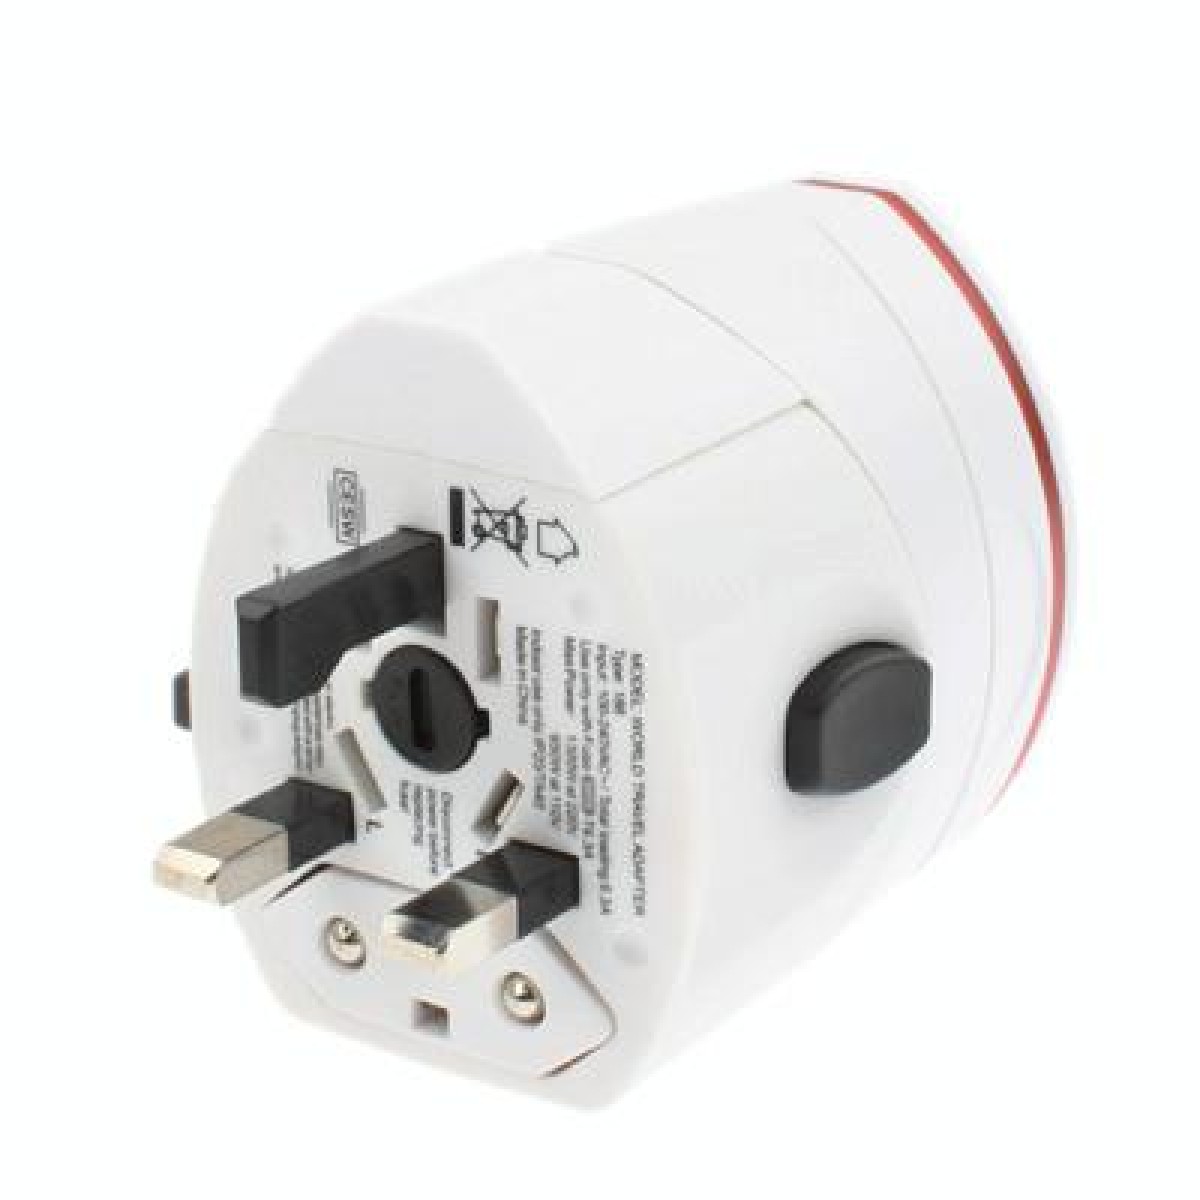 Plug Adapter, World Travel Adapter 2 & USB Charger